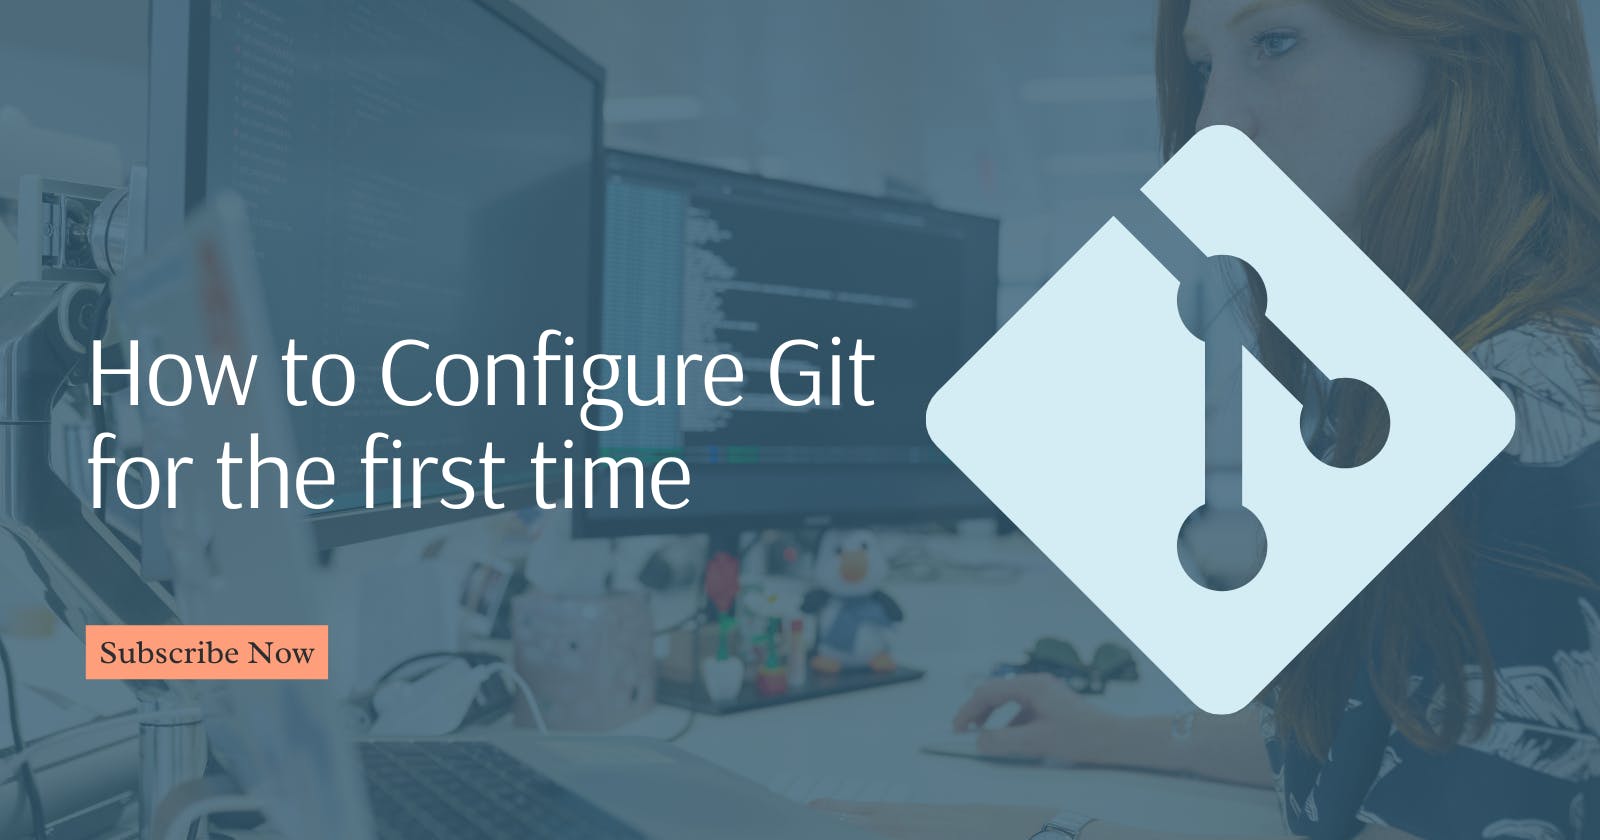 How to Configure Git for the first time: Name, email, and other settings